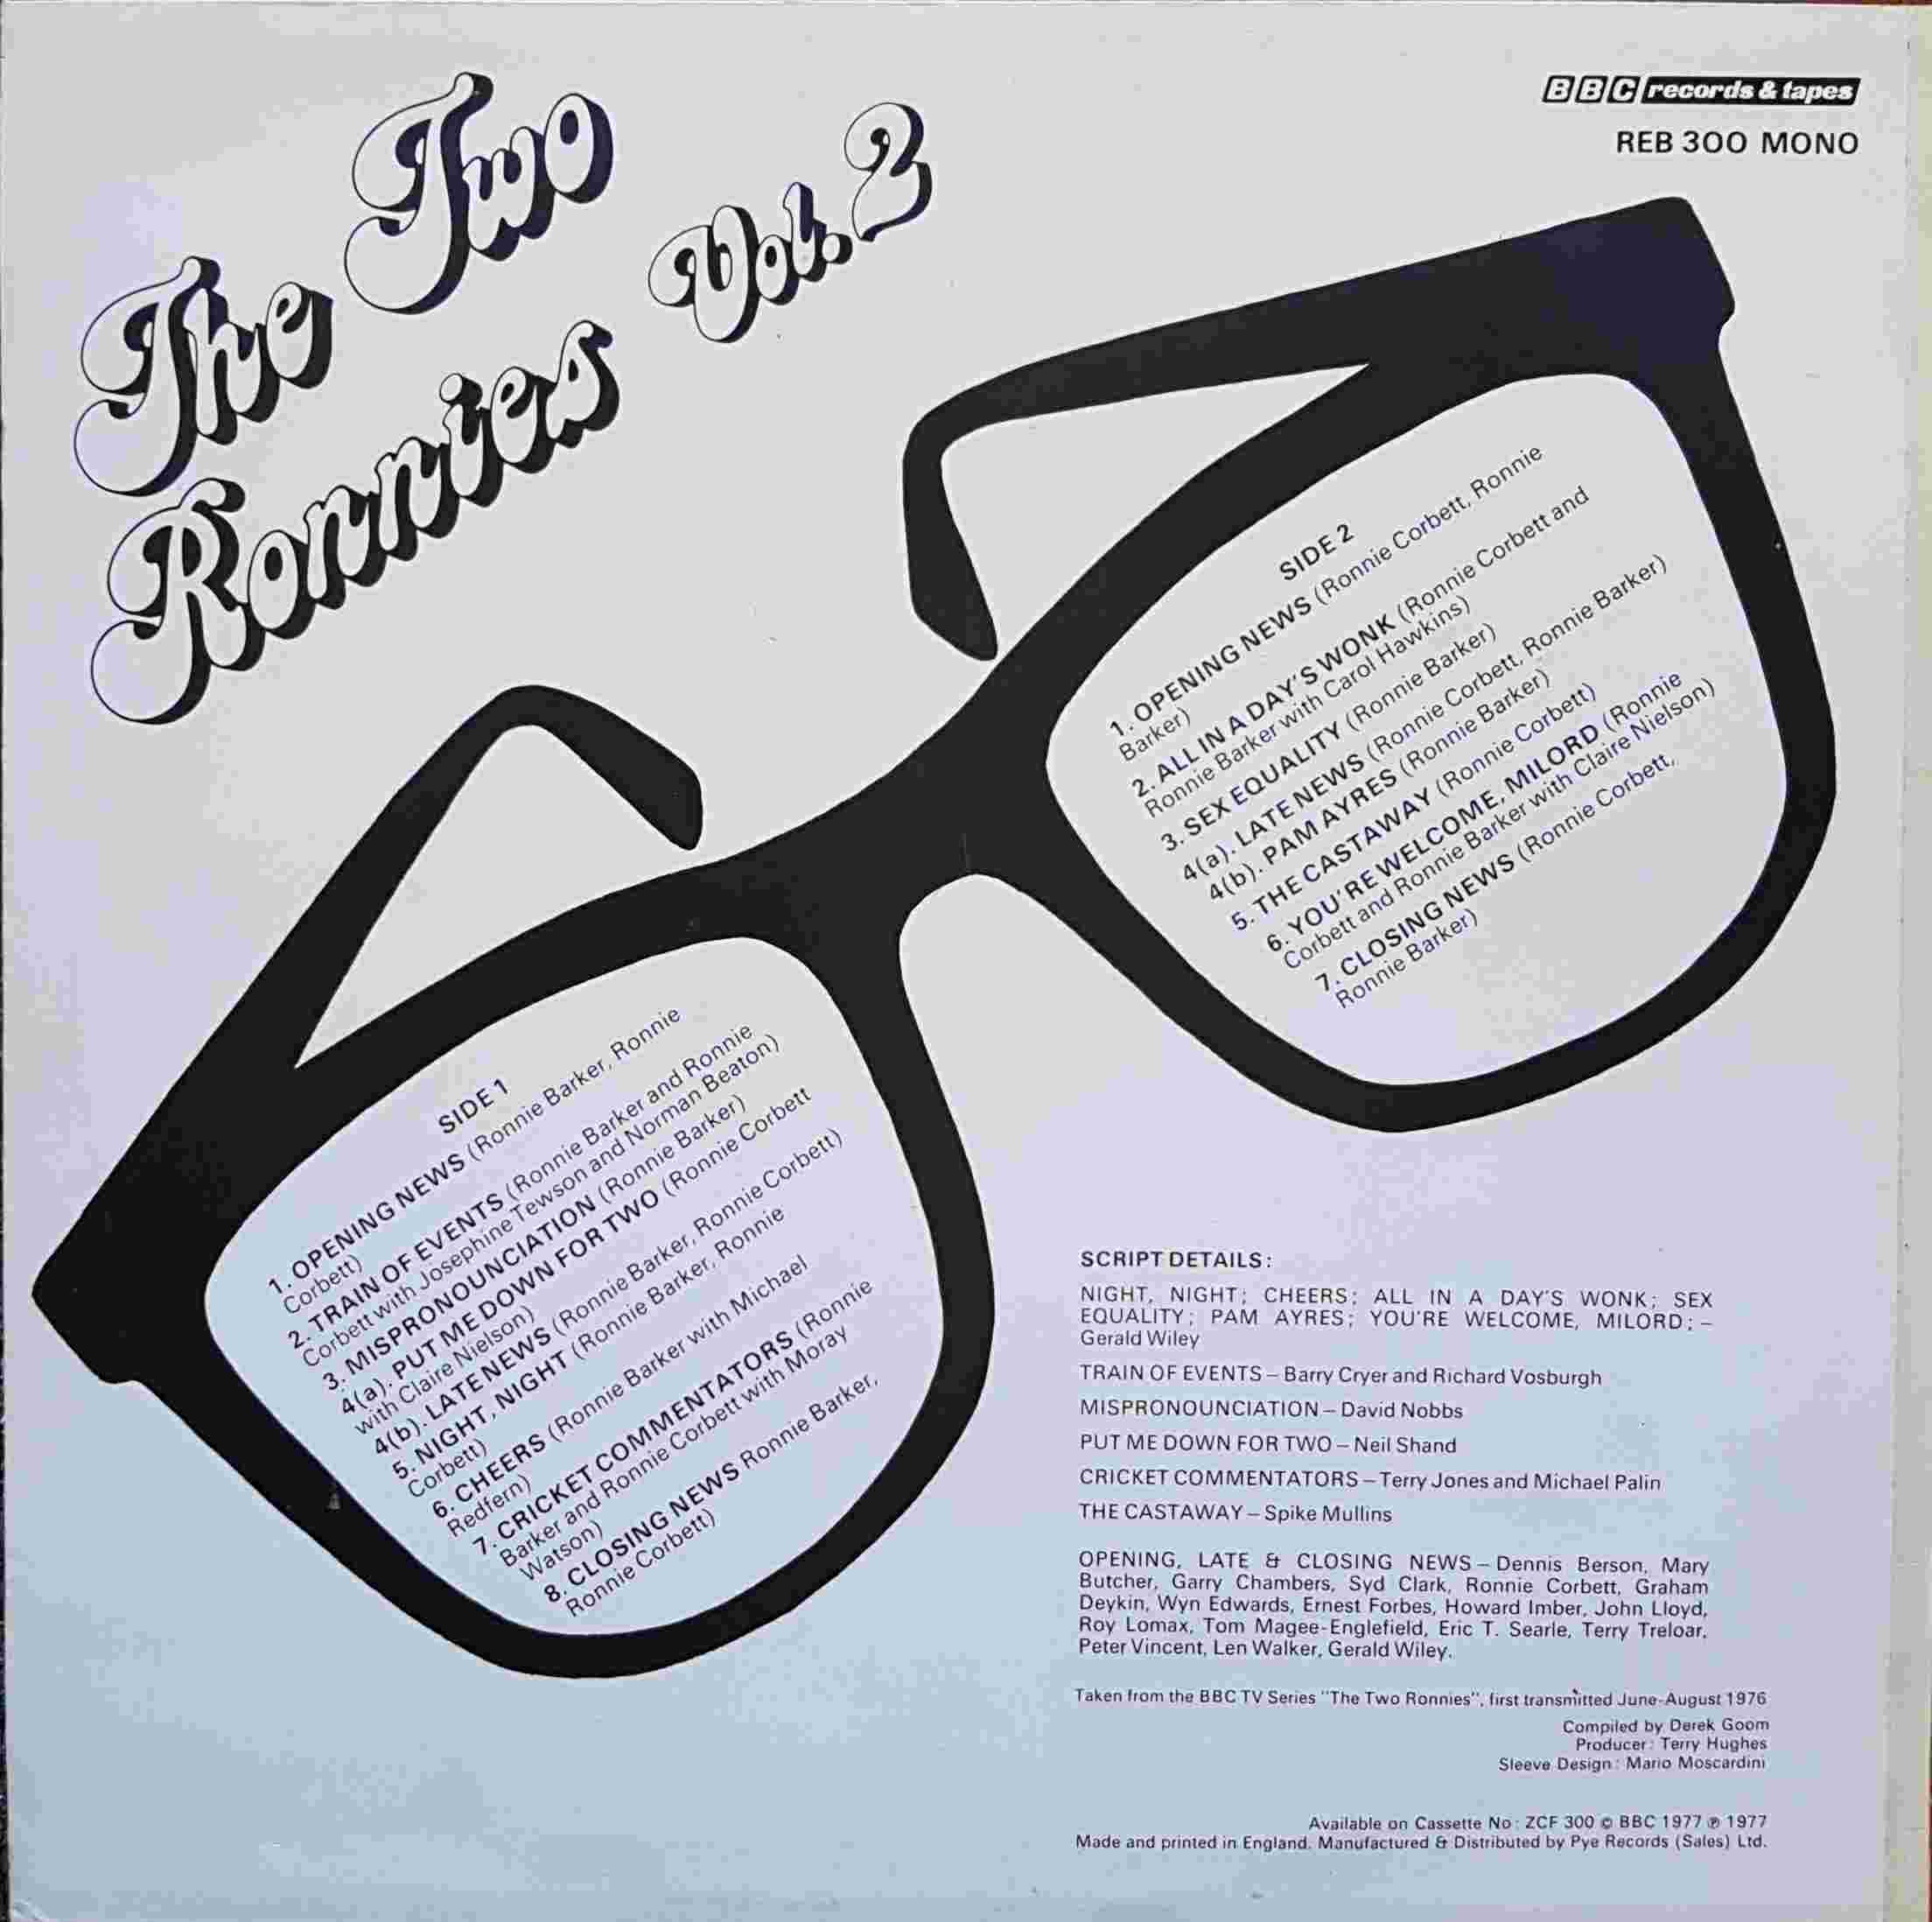 Picture of REB 300 The two Ronnies - Volume 2 by artist Various from the BBC records and Tapes library